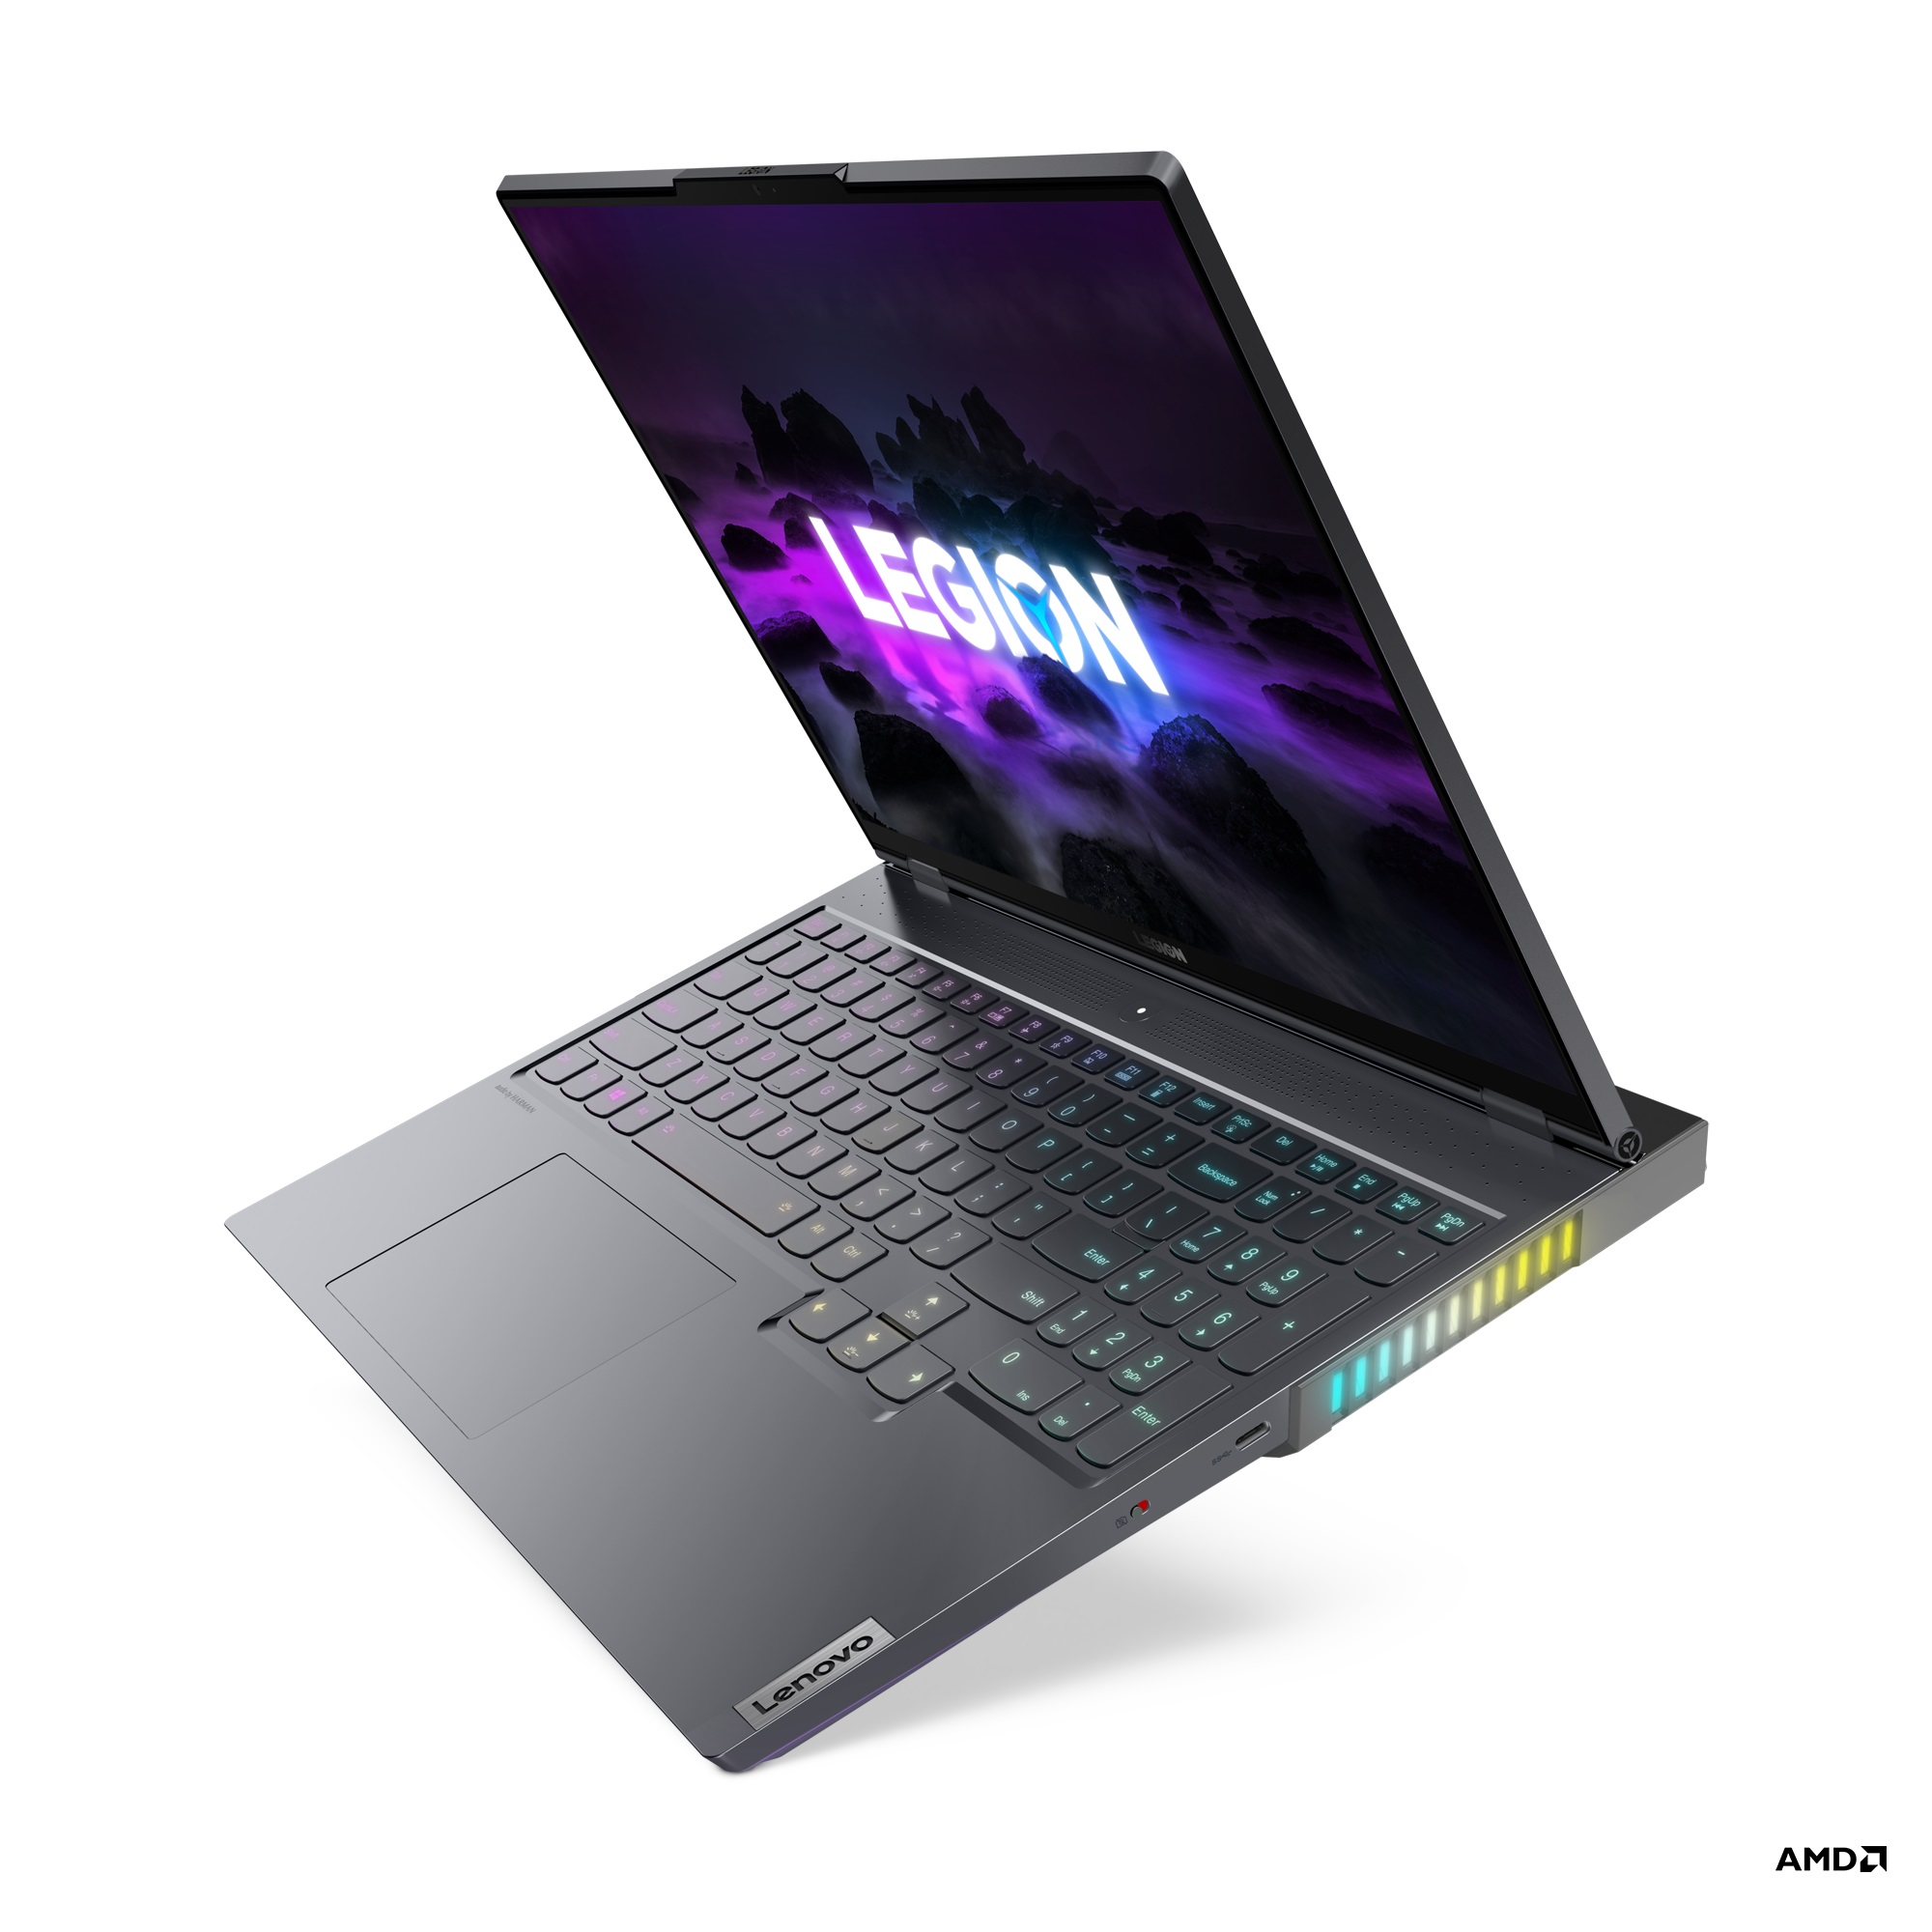 Lenovo Legion 7 open and facing left at an angle, floating